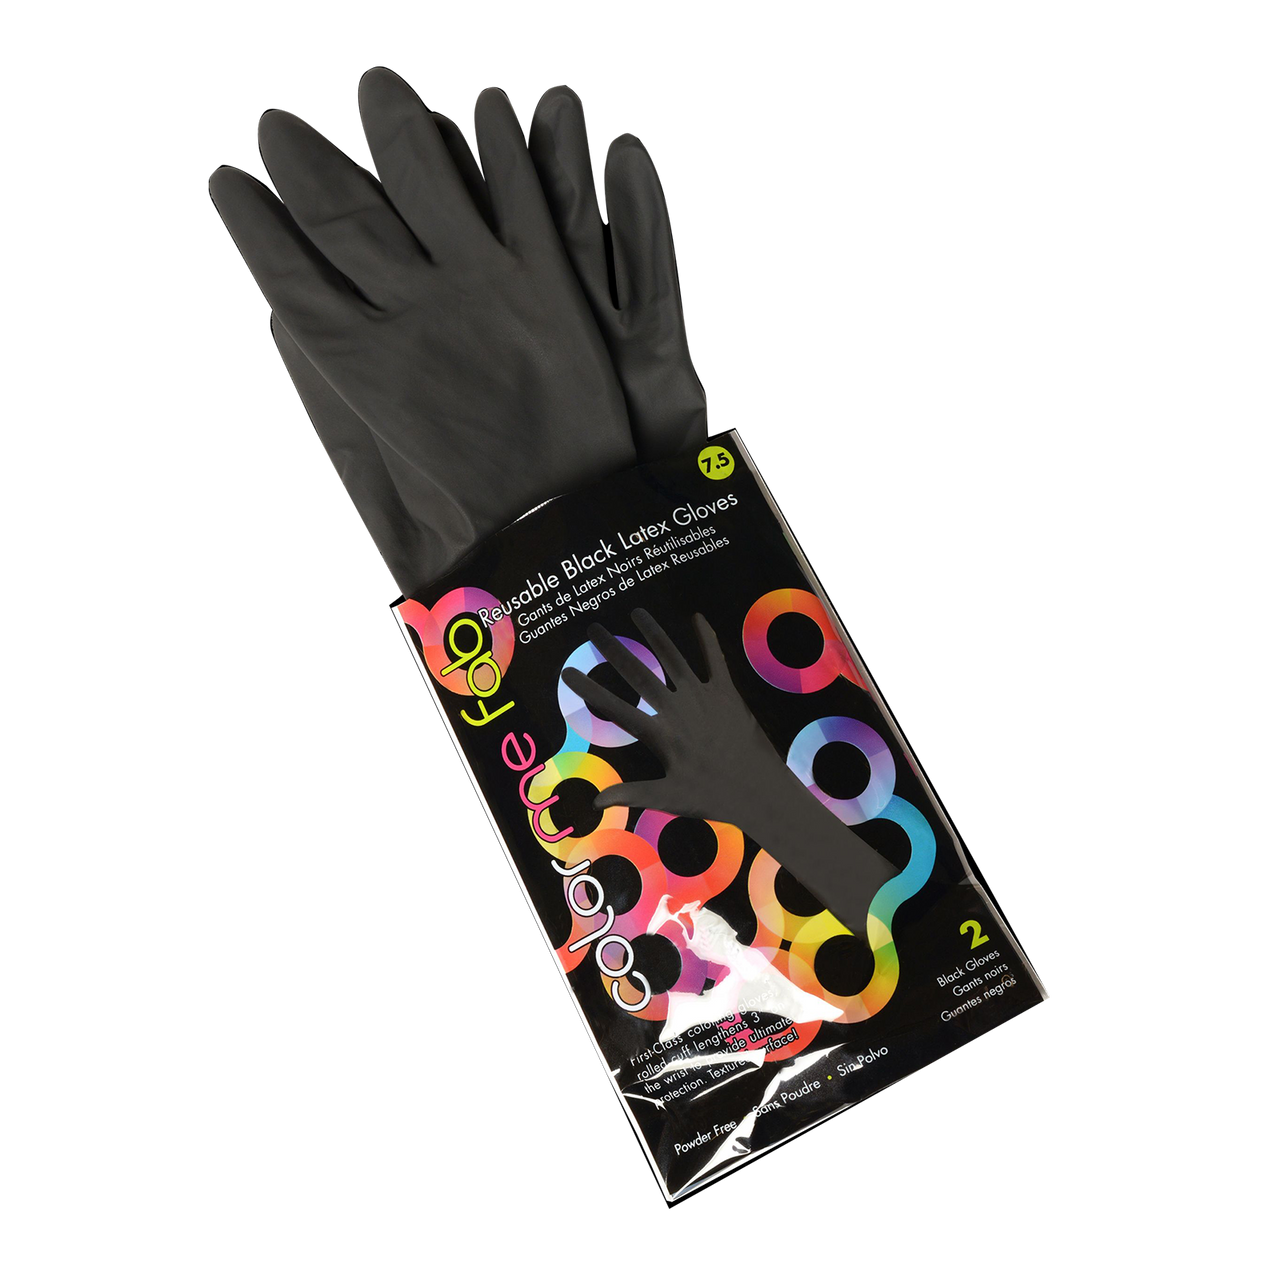 Framar Latex Reusable Gloves Extra Small - 2 pack